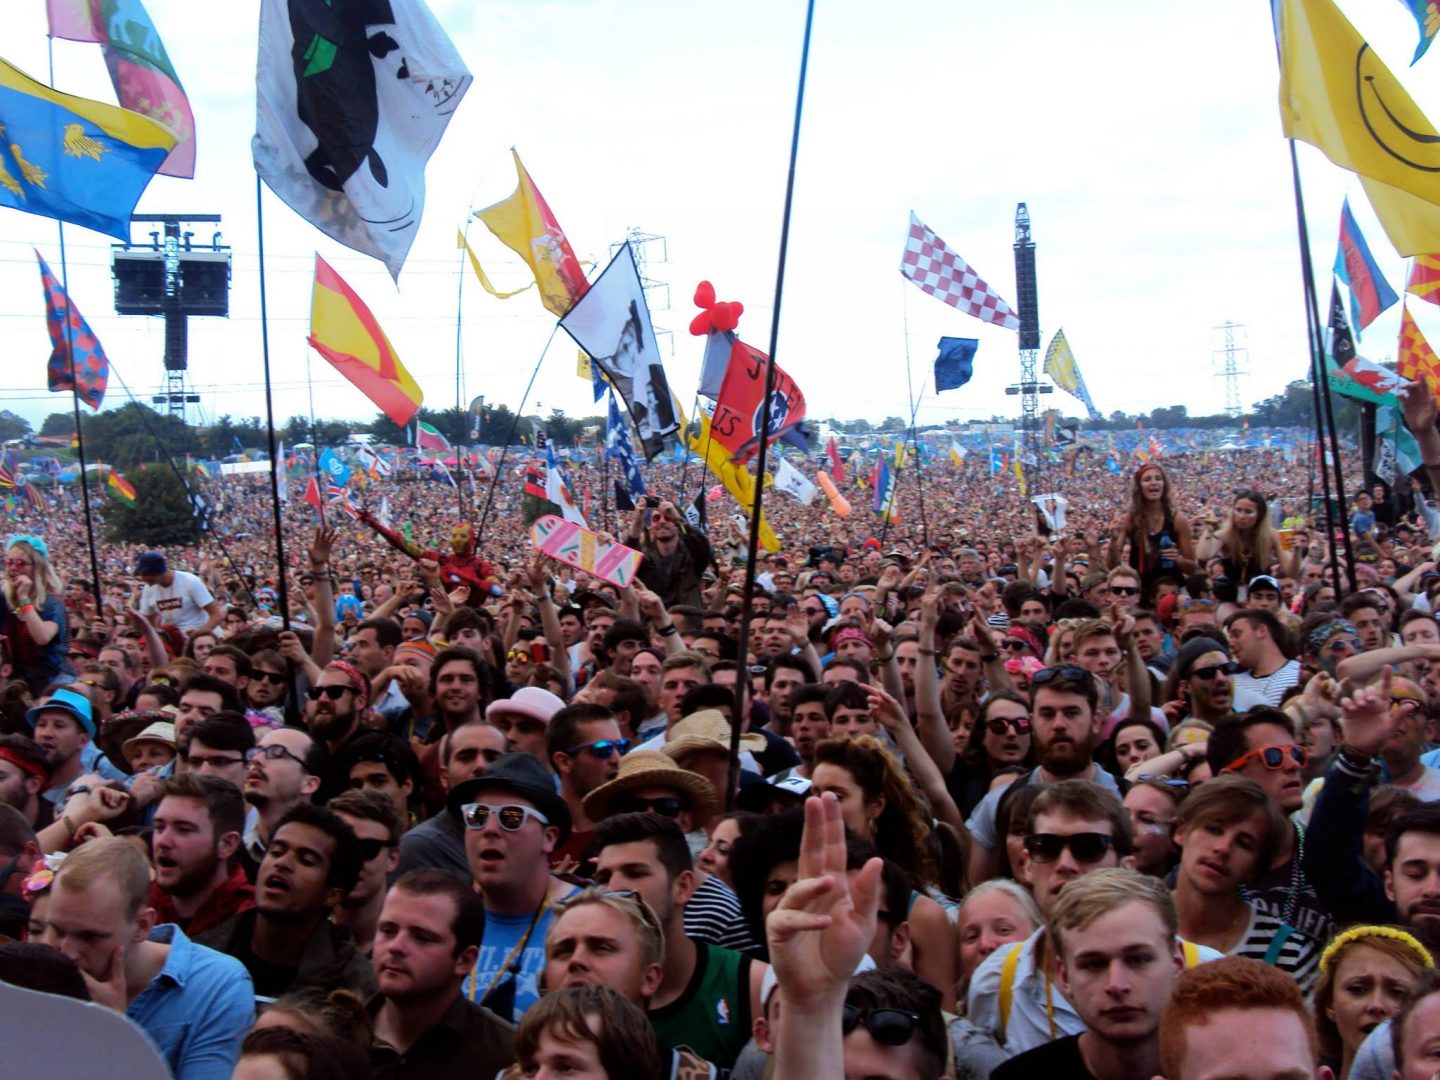 The crowd at Glastonbury Festival's Pyramid Stage